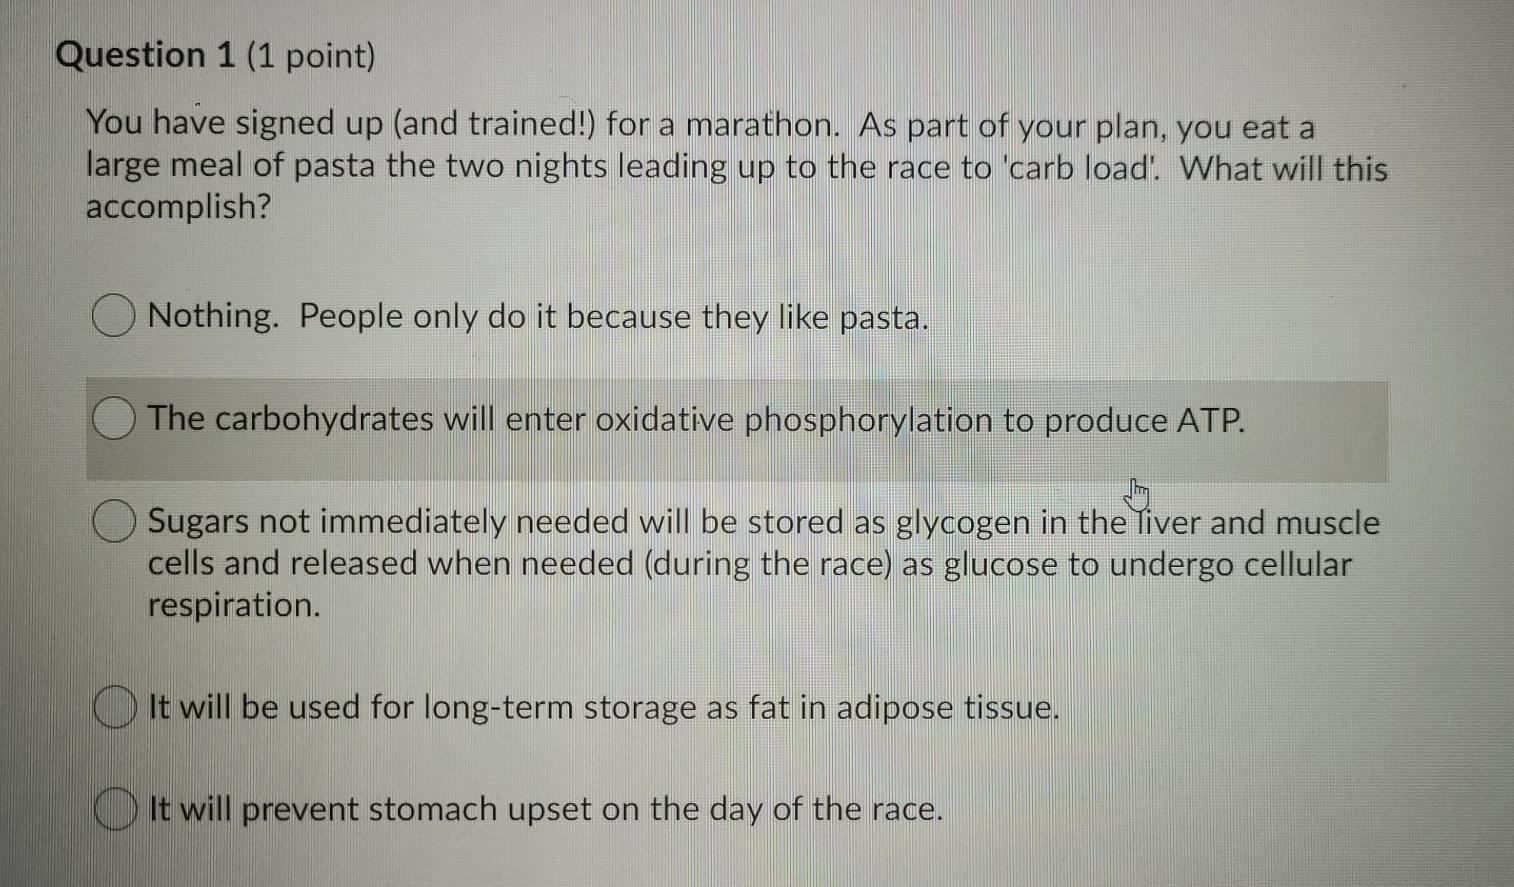 Question 1 (1 point) You have signed up (and trained!) for a marathon. As part of your plan, you eat a large meal of pasta th